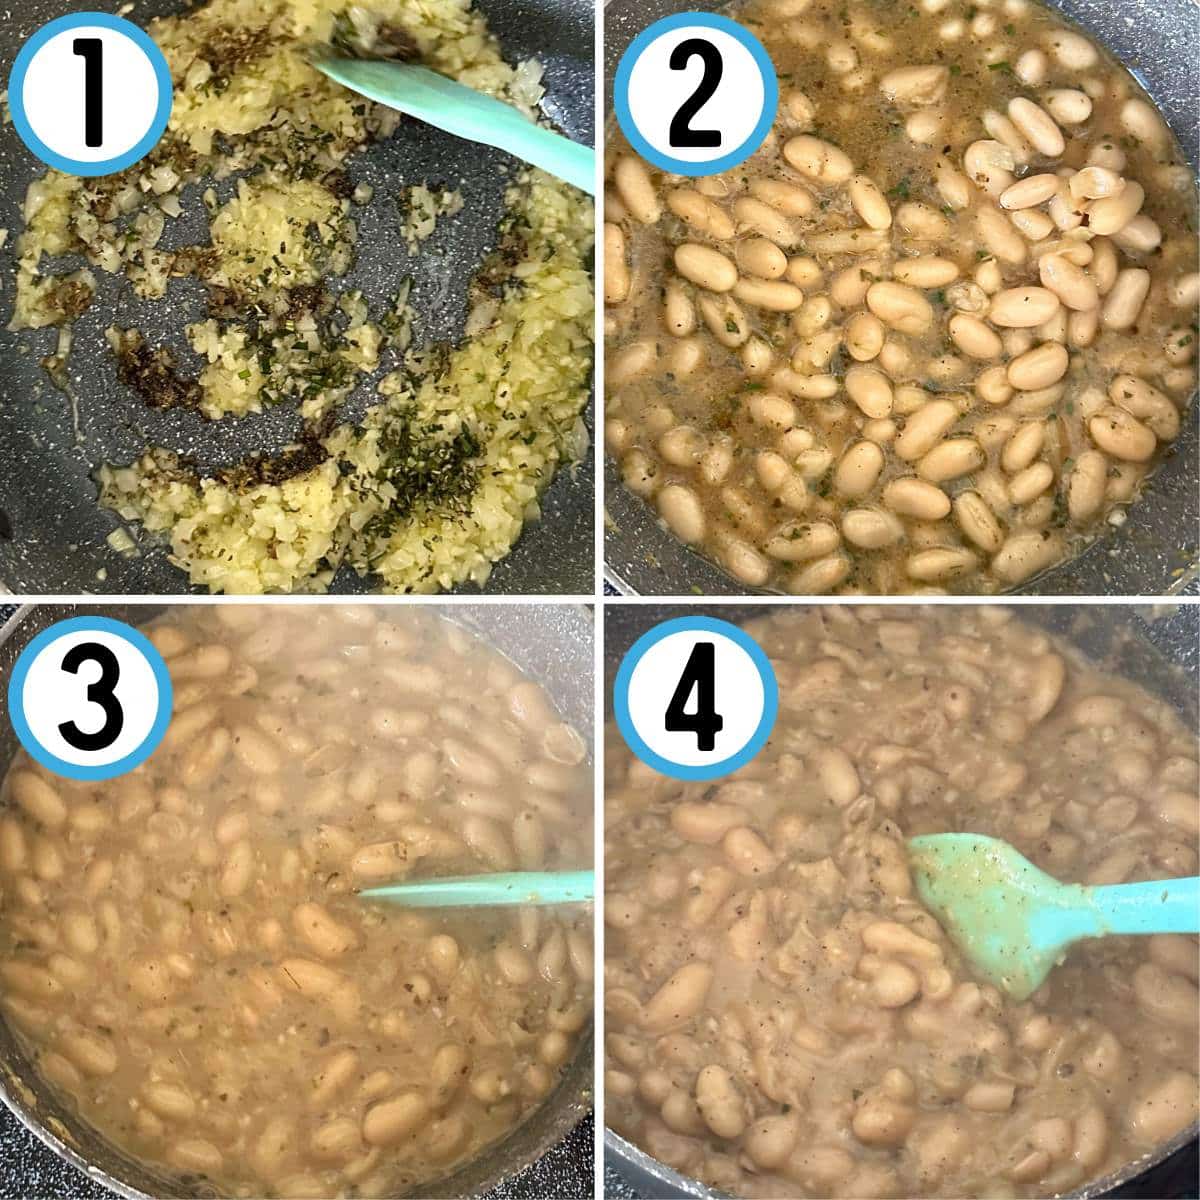 Step by step guide to braising white beans. 1. Sauté onion, garlic, and herbs. 2. Add broth and beans. 3. Cook and stir frequently. 4. Continue cooking until liquid is absorbed and beans are creamy. 